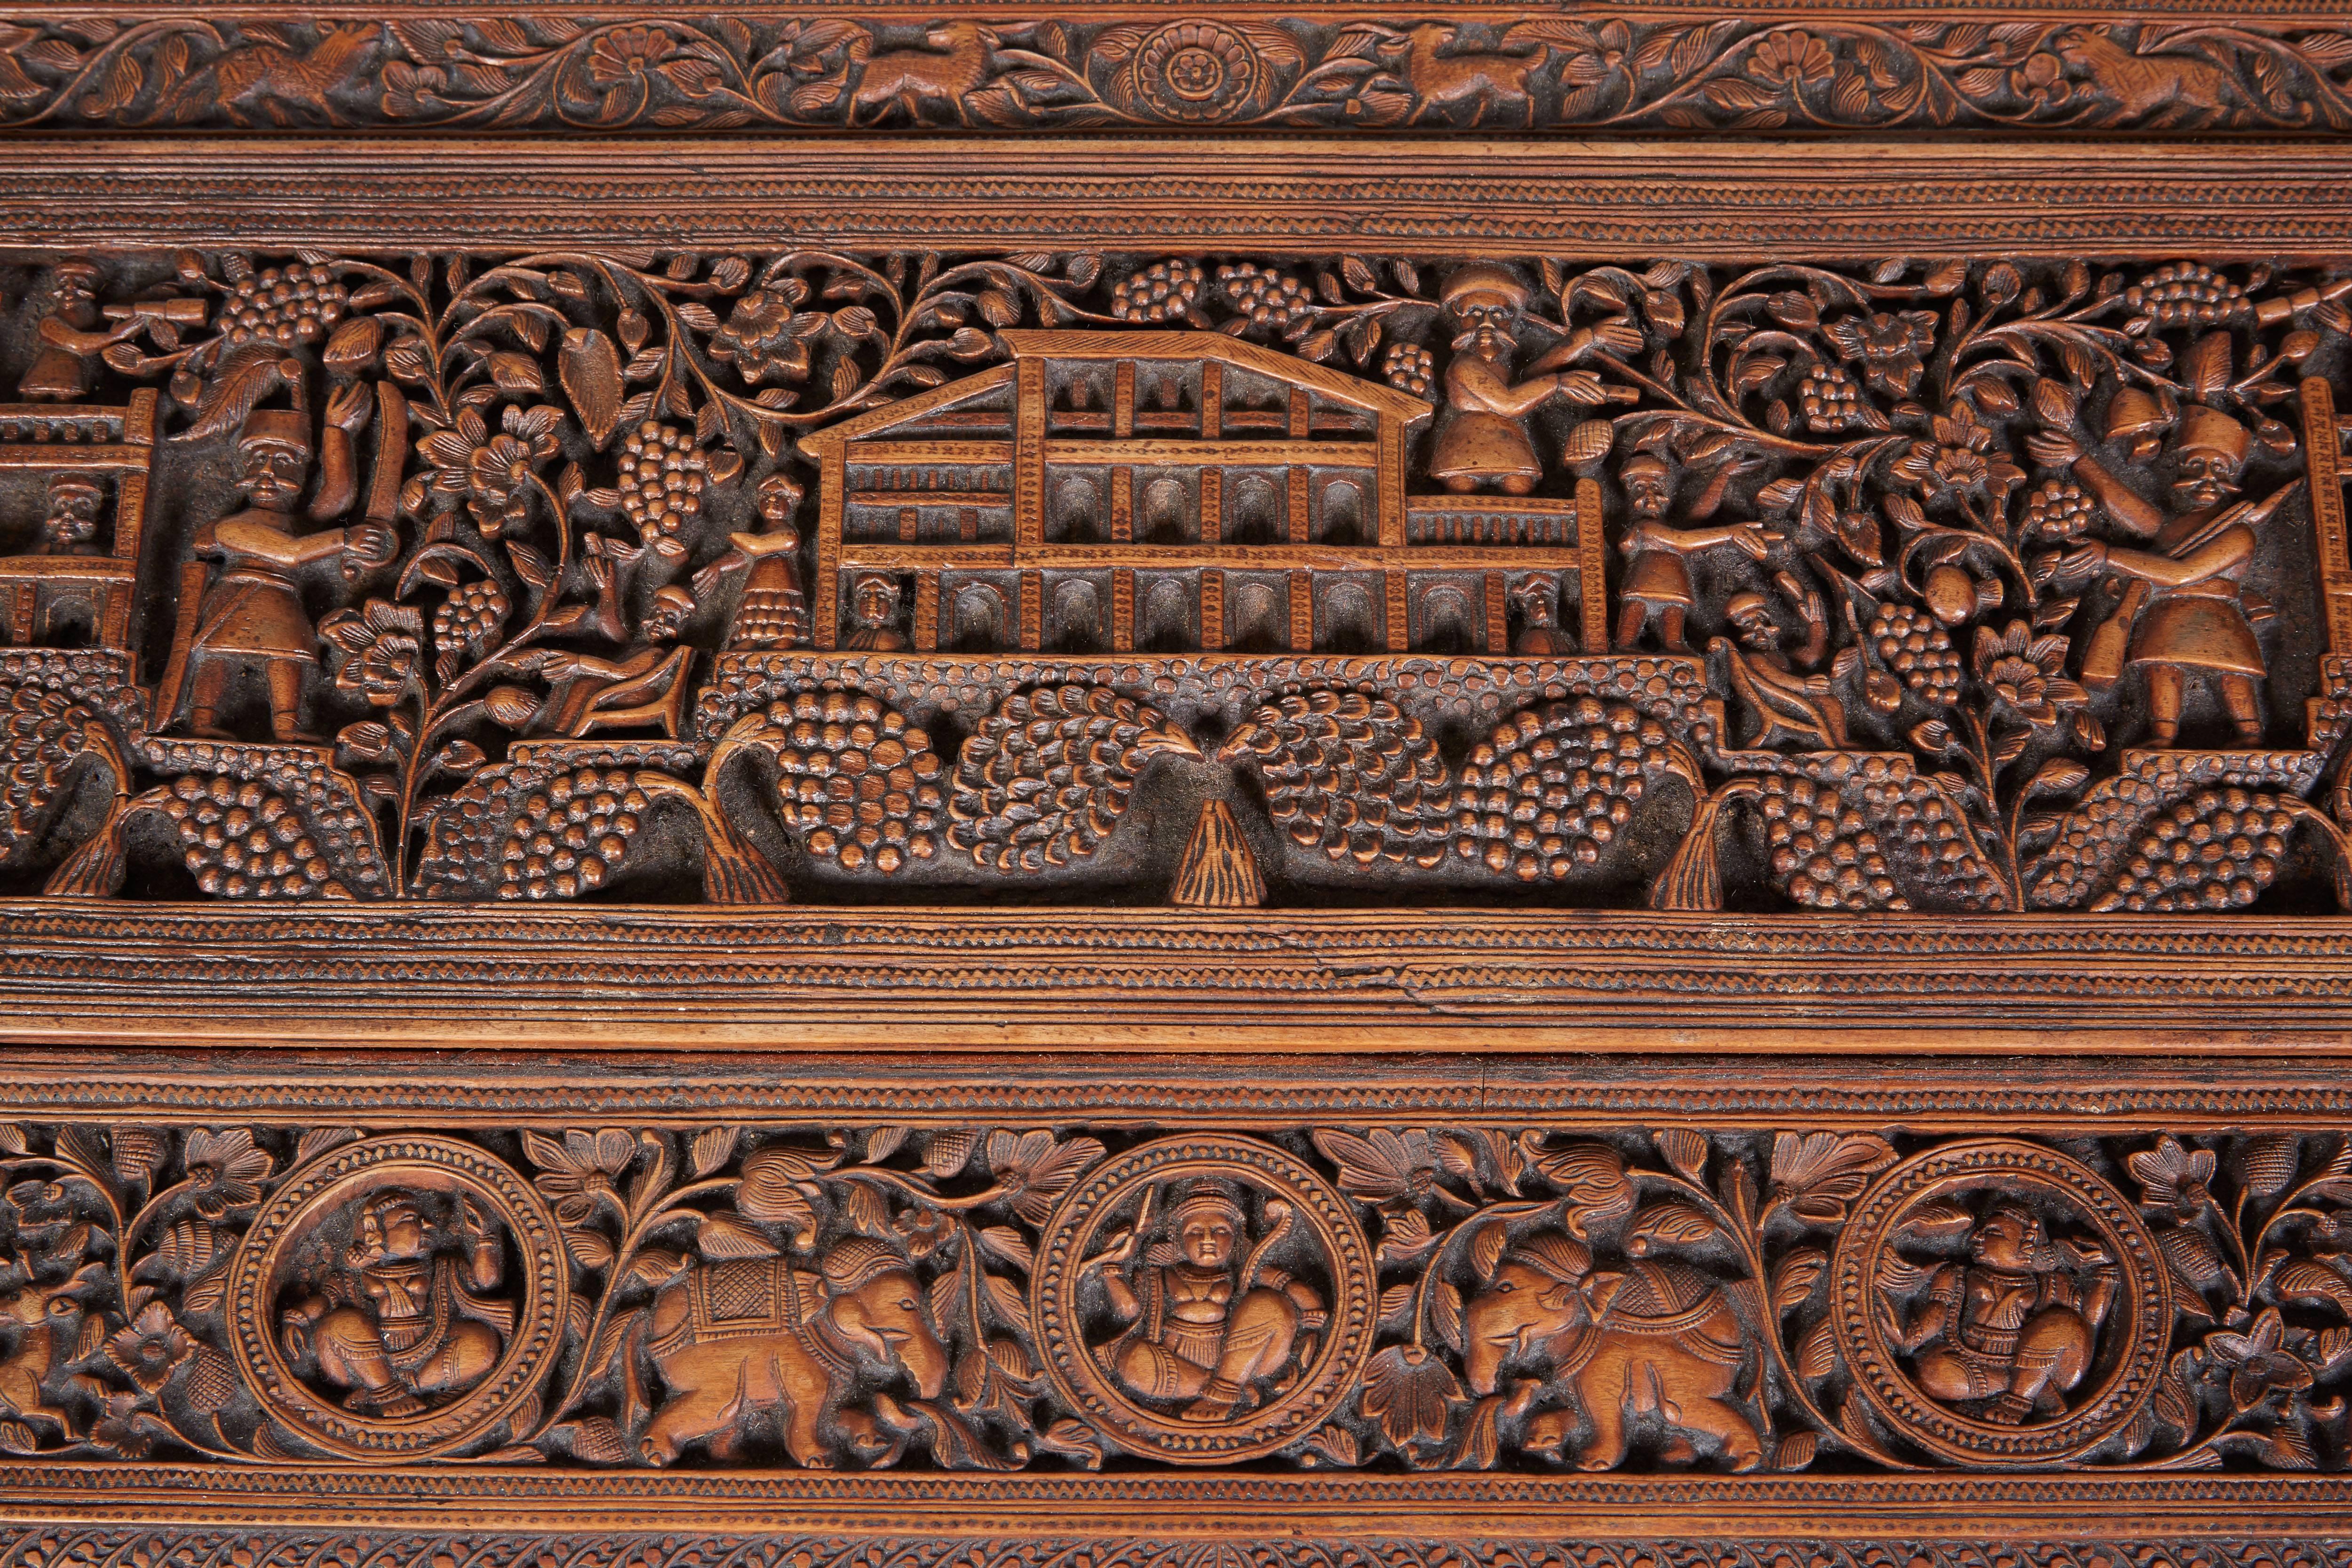 Hand-Carved Exquisite Anglo-Indian Sandalwood Carved Writing Desk Mysore, South India